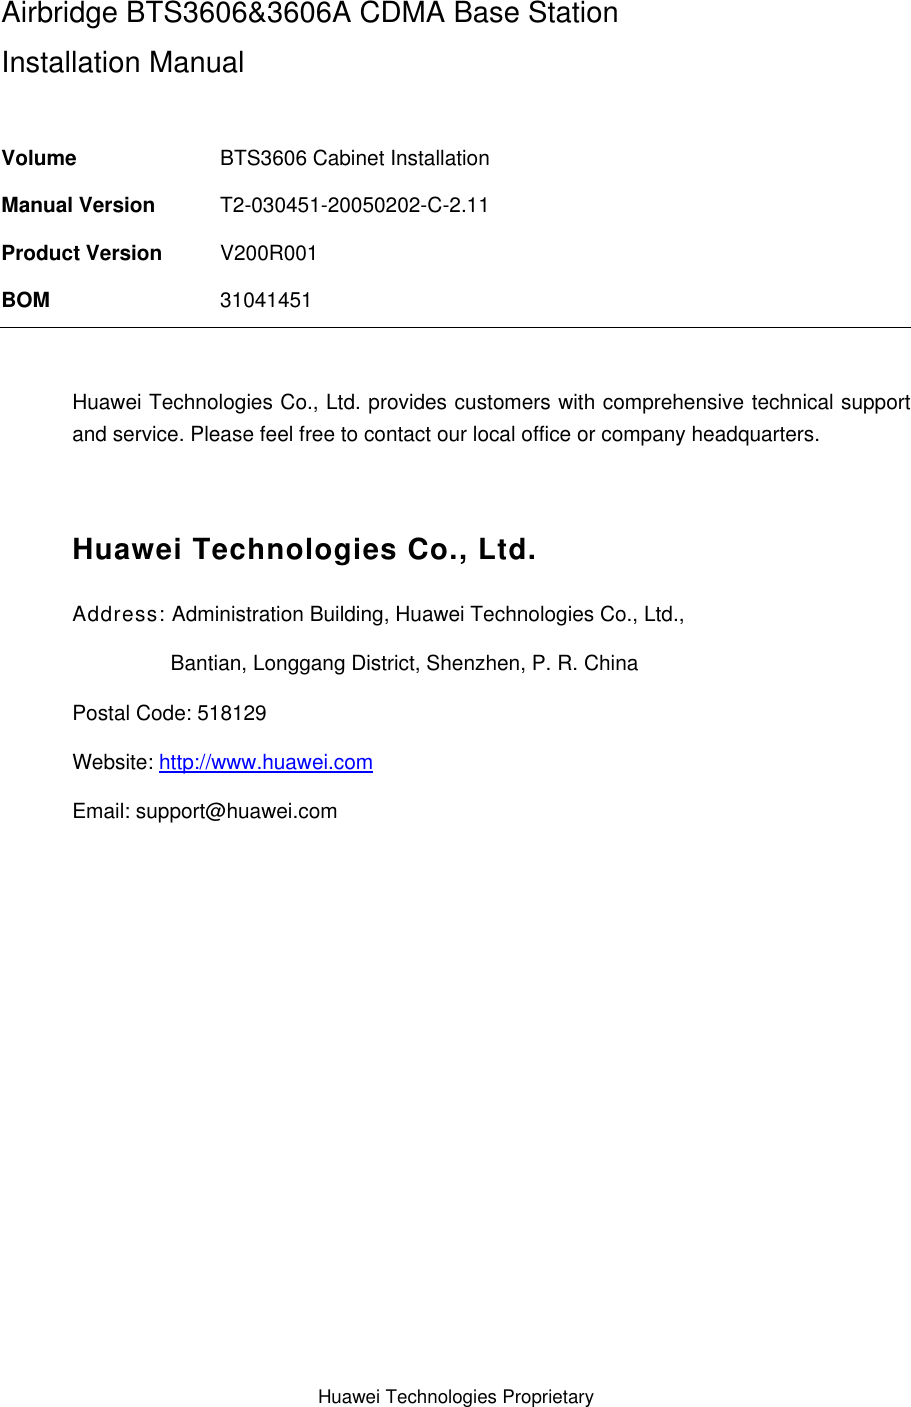 Huawei Technologies Proprietary  Airbridge BTS3606&amp;3606A CDMA Base Station Installation Manual  Volume  BTS3606 Cabinet Installation Manual Version  T2-030451-20050202-C-2.11 Product Version  V200R001 BOM  31041451  Huawei Technologies Co., Ltd. provides customers with comprehensive technical support and service. Please feel free to contact our local office or company headquarters.  Huawei Technologies Co., Ltd. Address: Administration Building, Huawei Technologies Co., Ltd.,                  Bantian, Longgang District, Shenzhen, P. R. China Postal Code: 518129 Website: http://www.huawei.com Email: support@huawei.com  